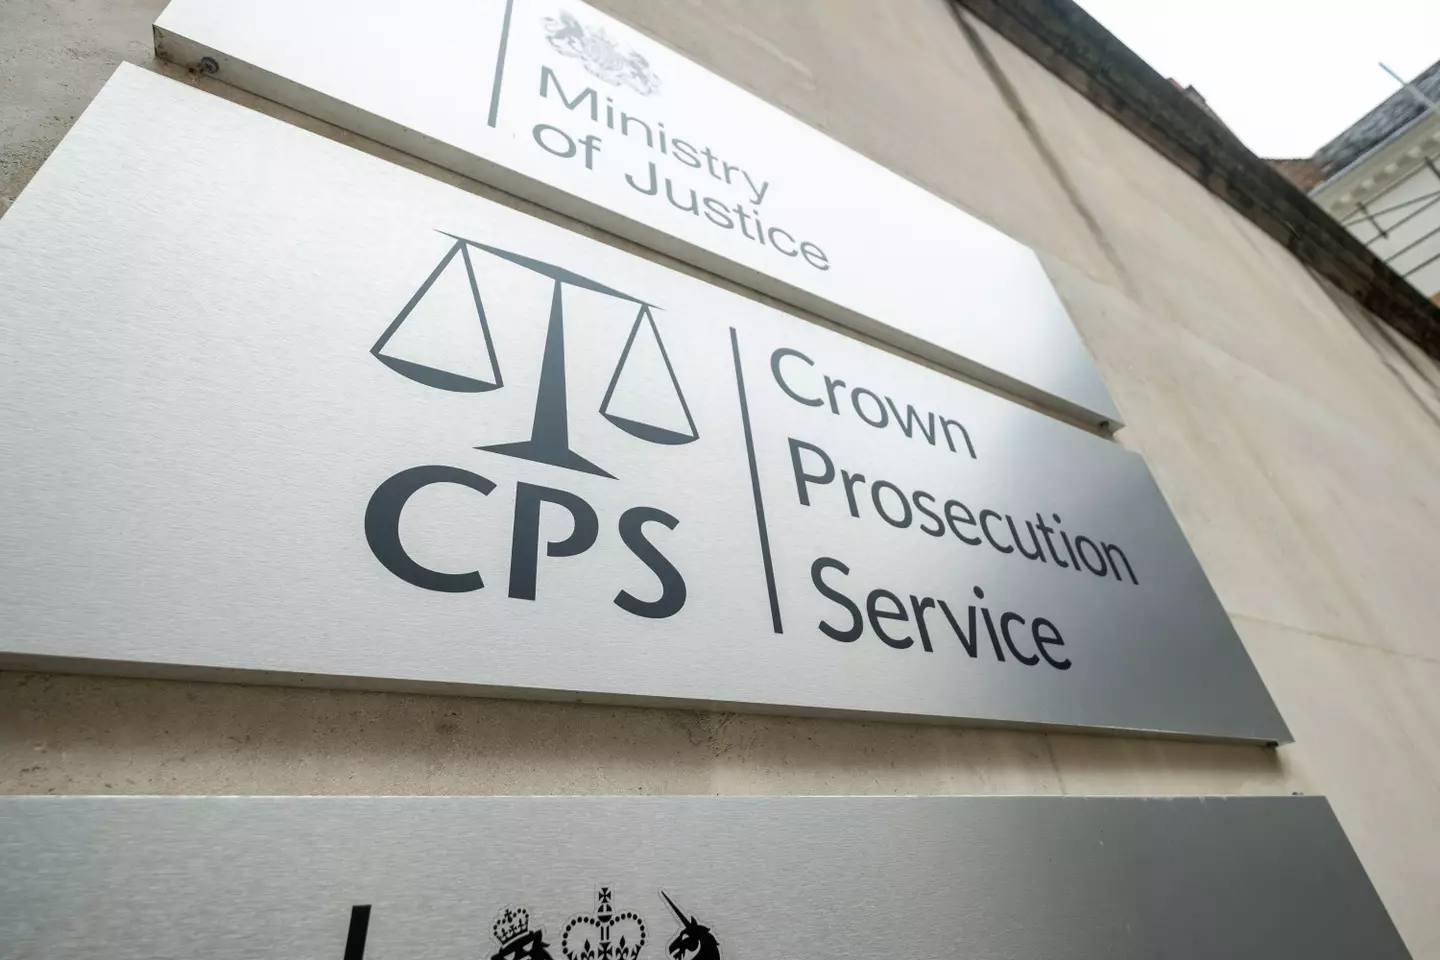 The CPS has apologised to Jade McCrossen-Nethercott in a statement on its website.